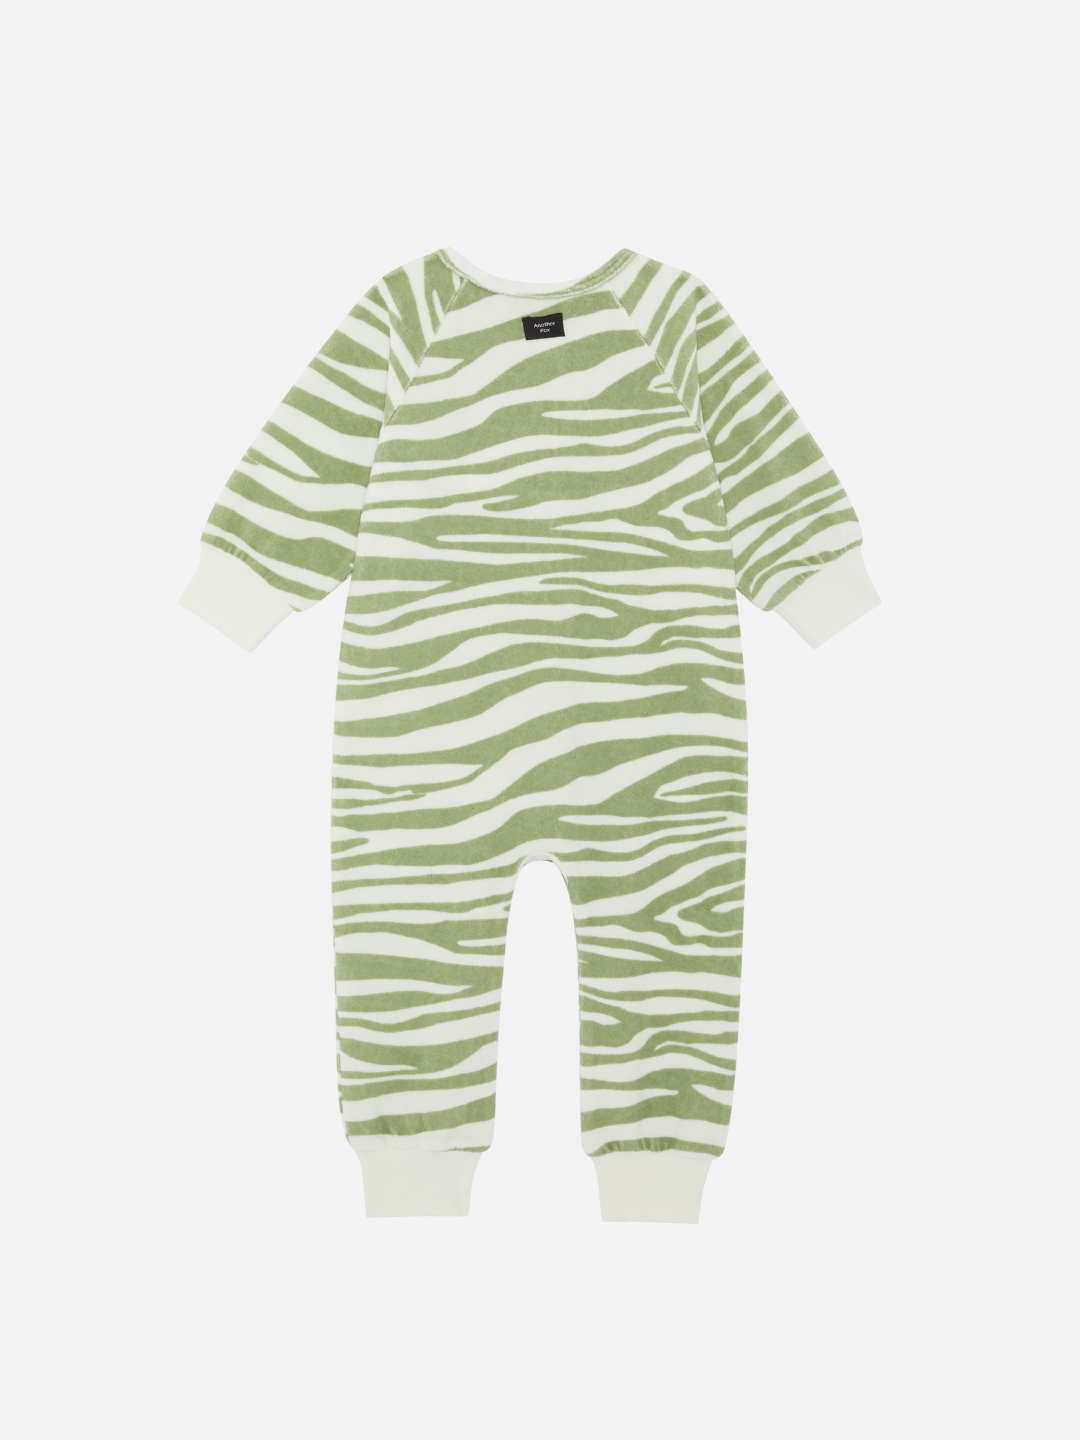 A back view of the baby terry towel sleep suit in green tiger print